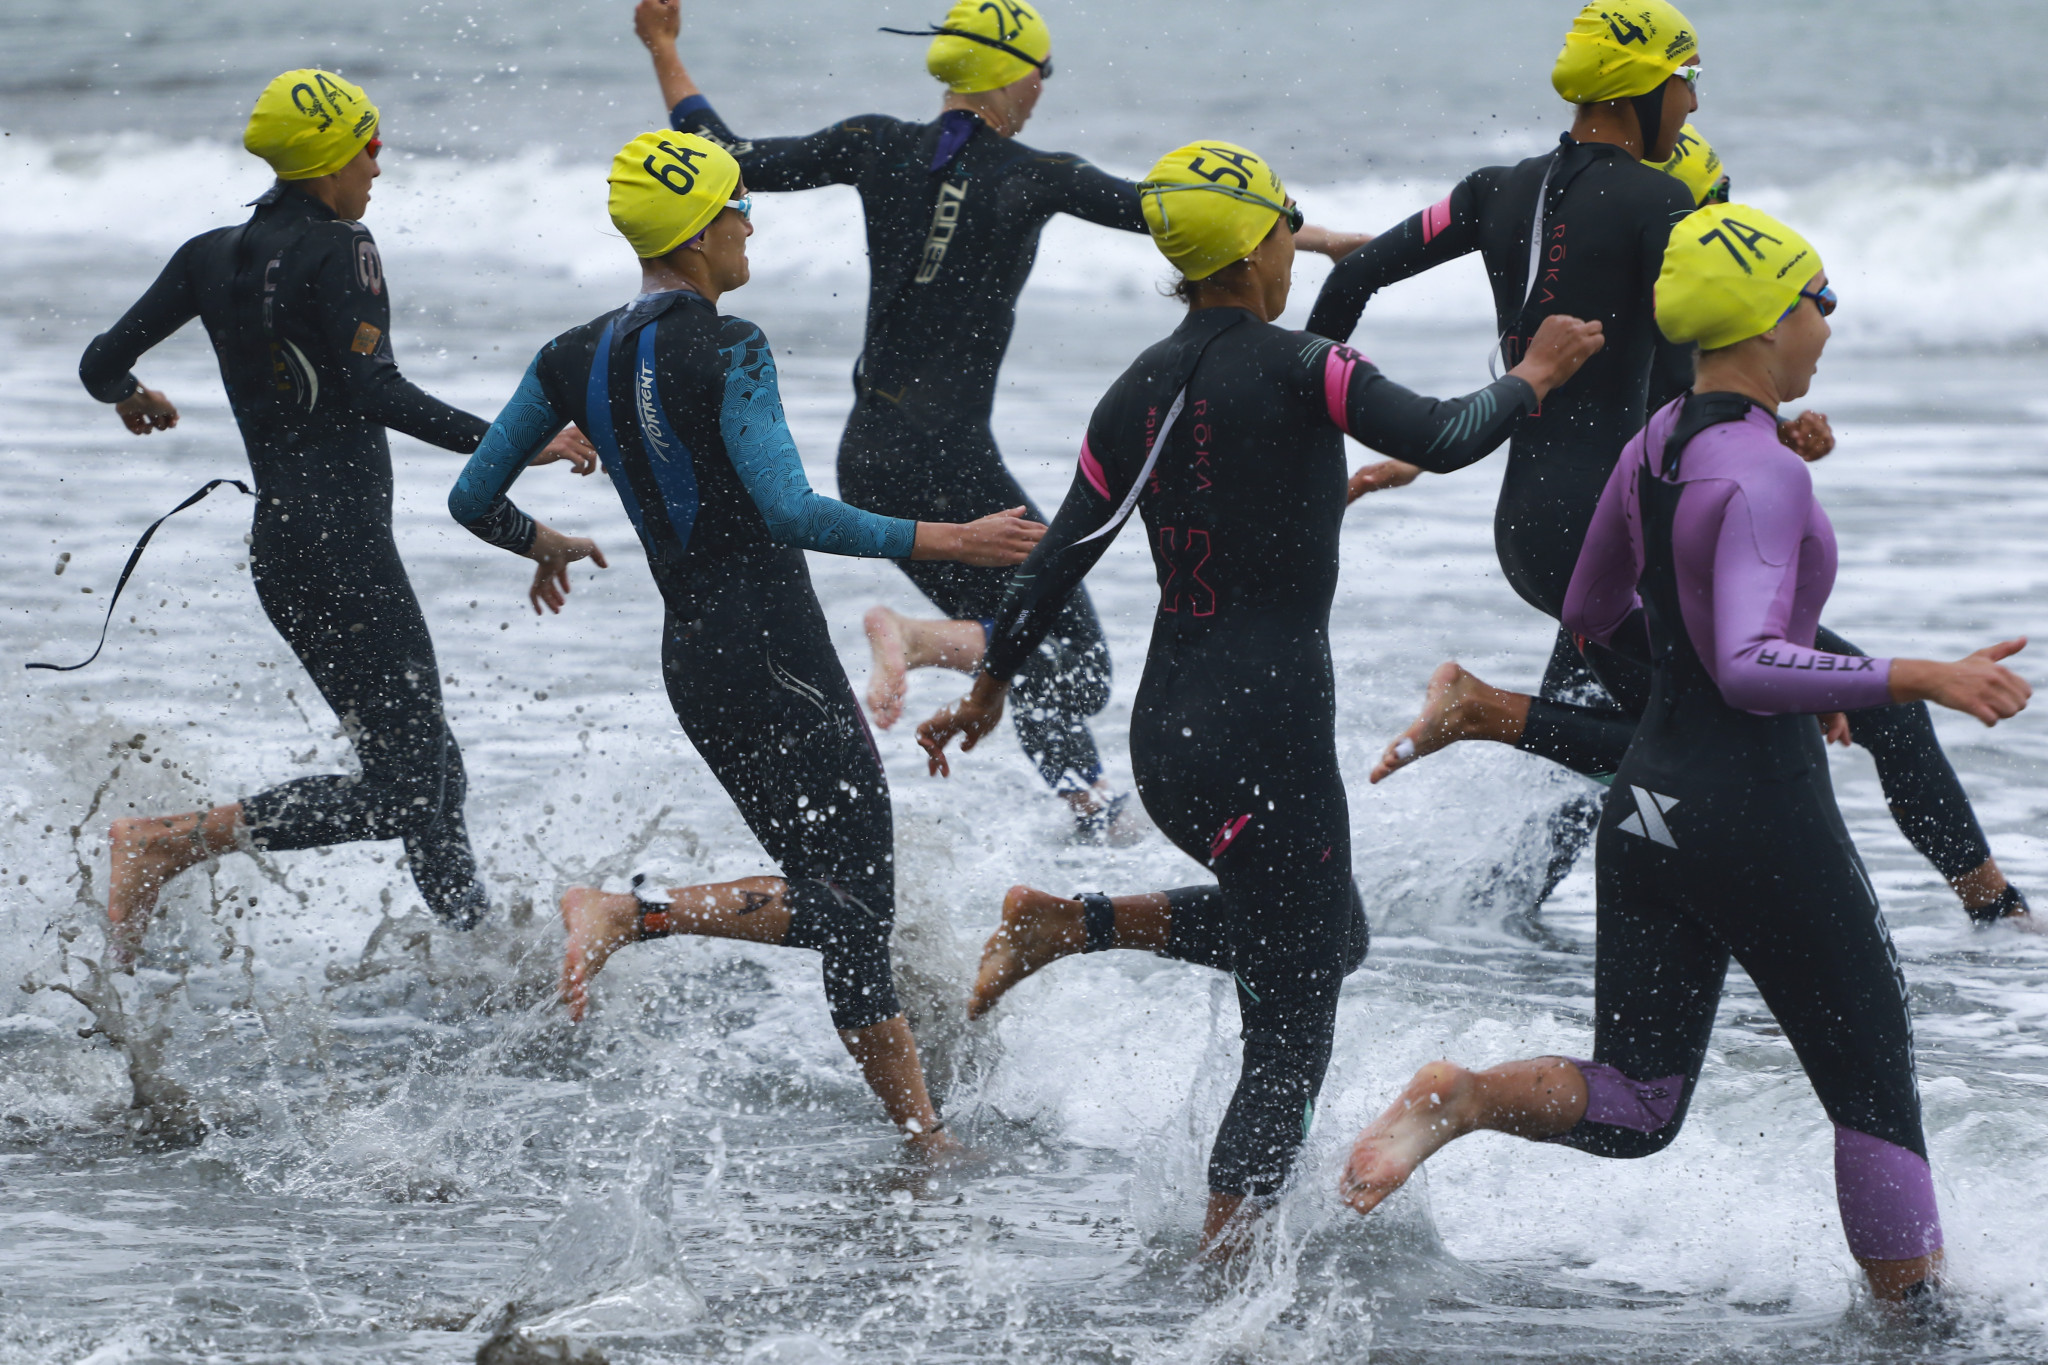 The men and women's team relay took place in triathlon ©Lima 2019